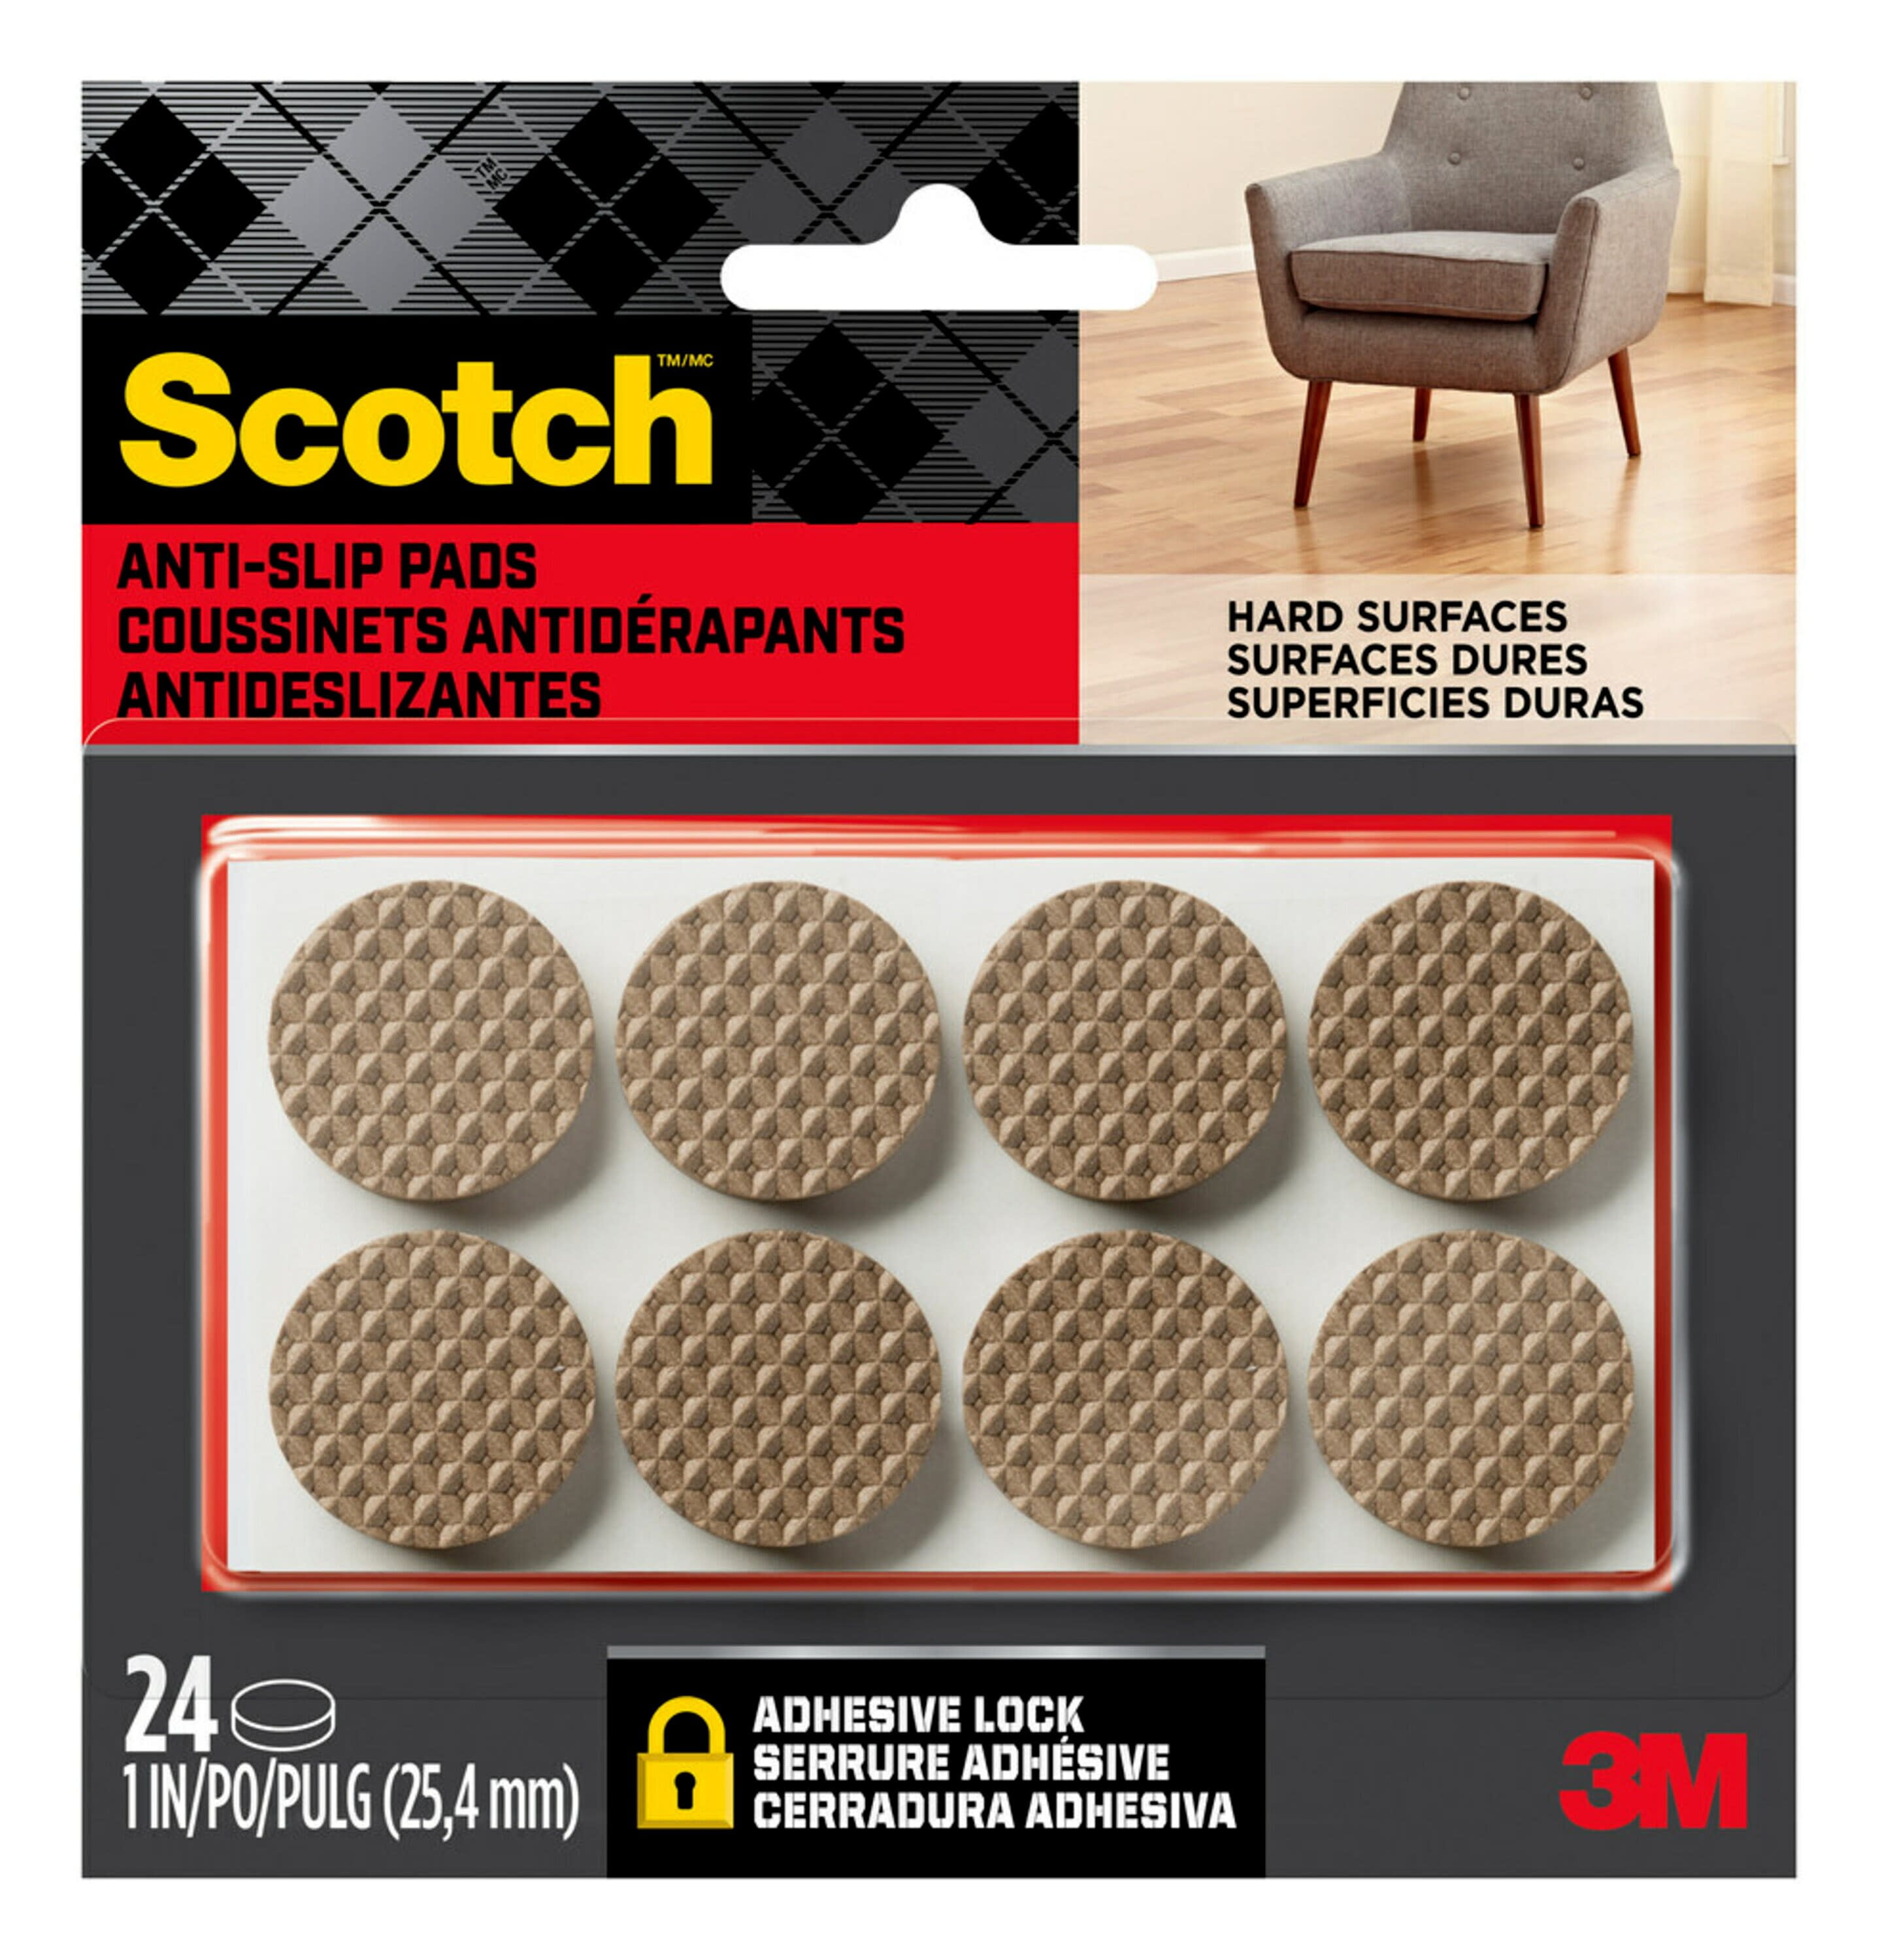 Scotch Gripping Pads, 1 in. Diameter, Brown, 24/Pack, Non-Slip Protection For Hard Surfaces